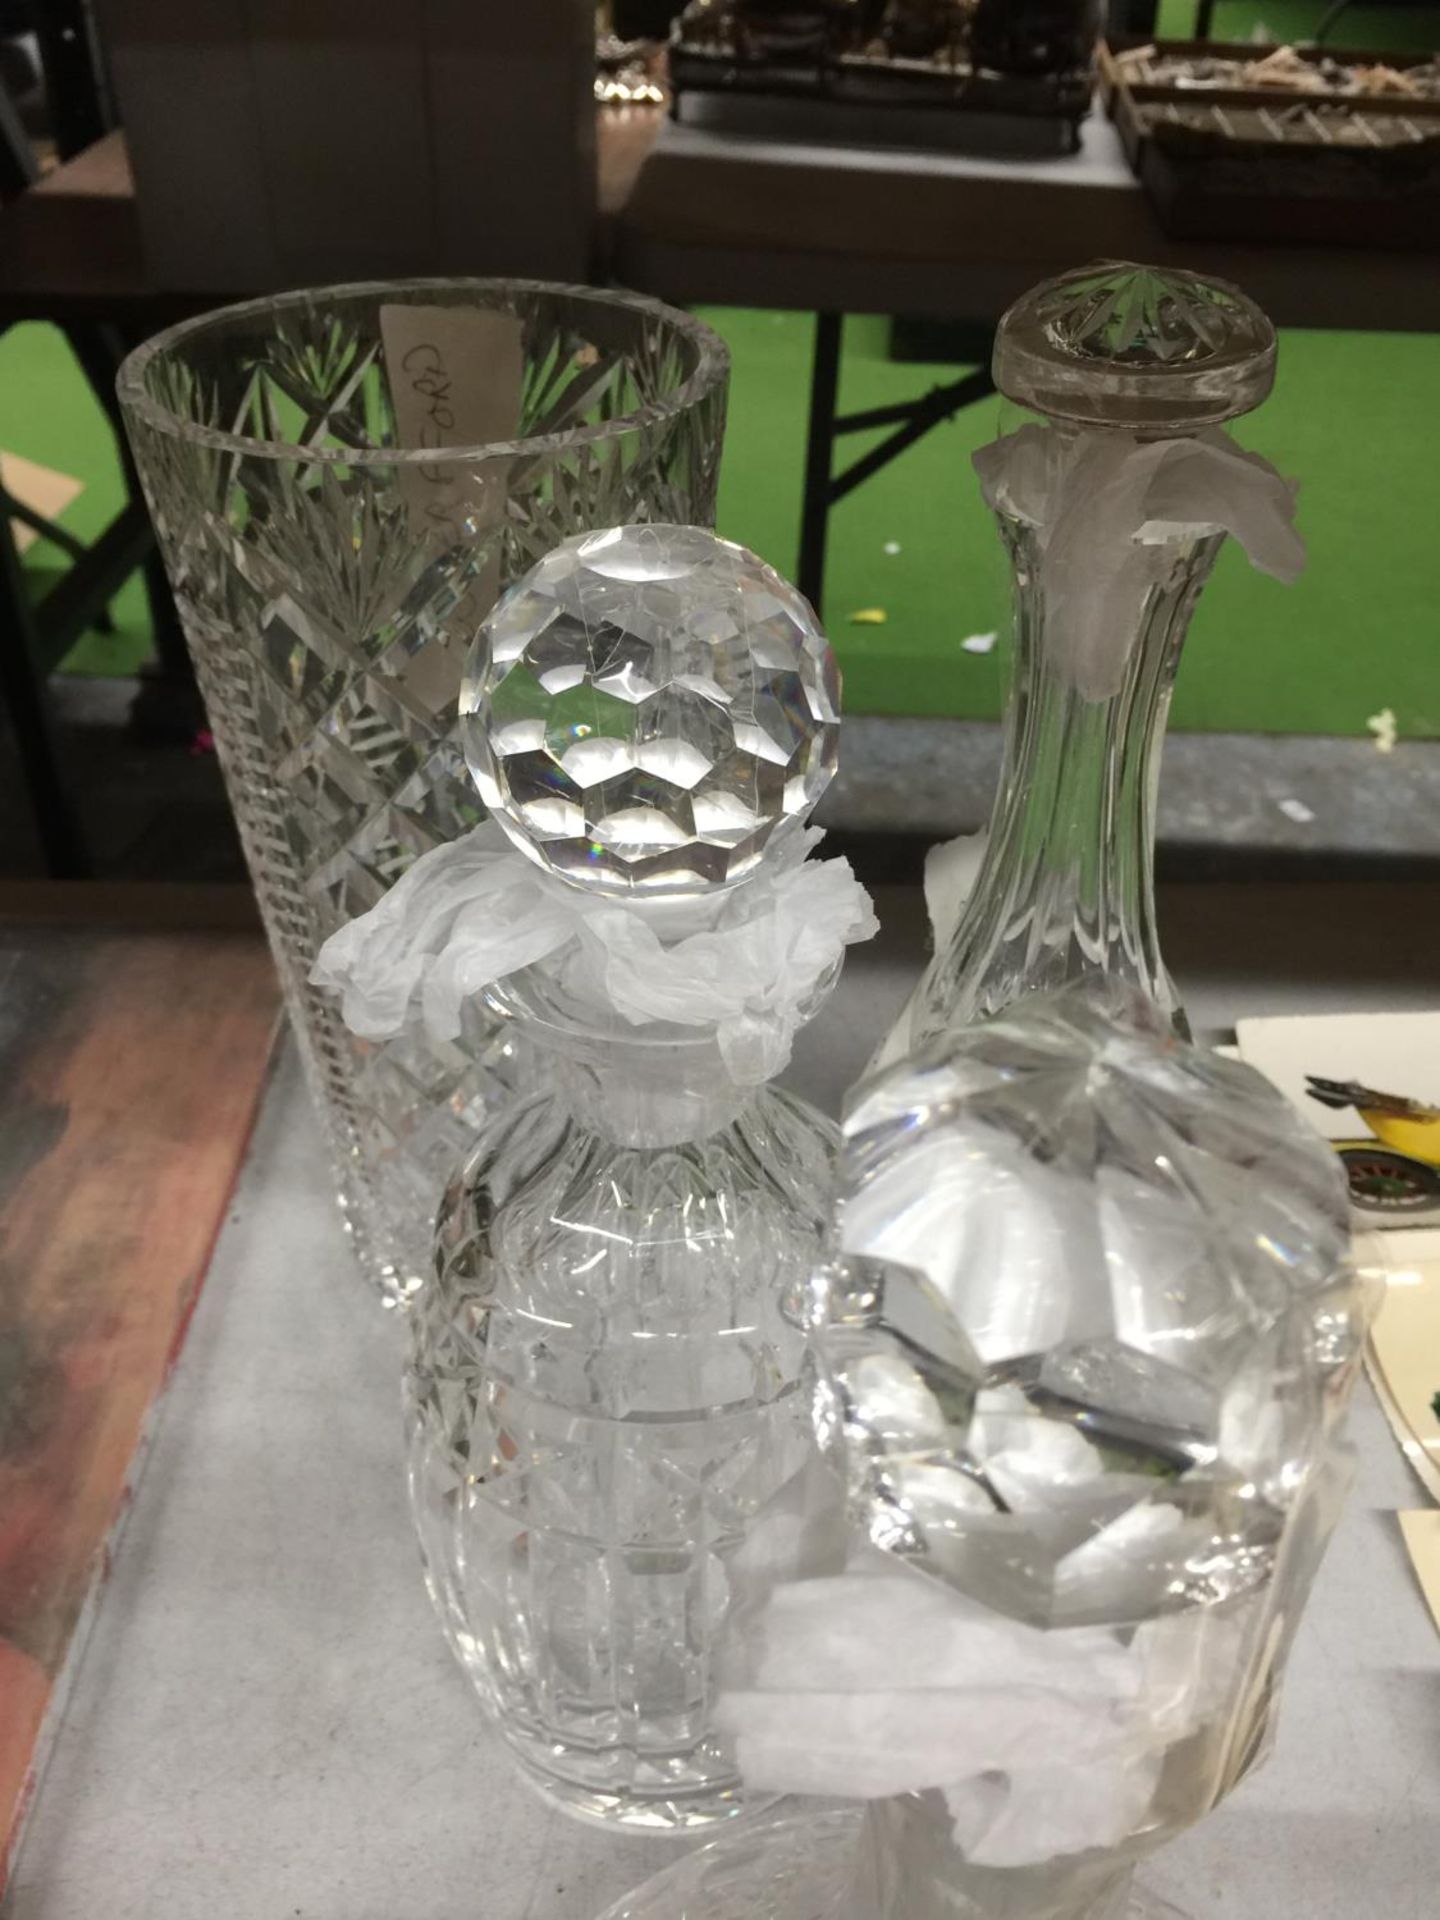 SIX PIECES OF WATERFORD CRYSTAL GLASS TO INCLUDE THREE DECANTERS, A LARGE AND SMALLER VASE AND A - Image 3 of 3